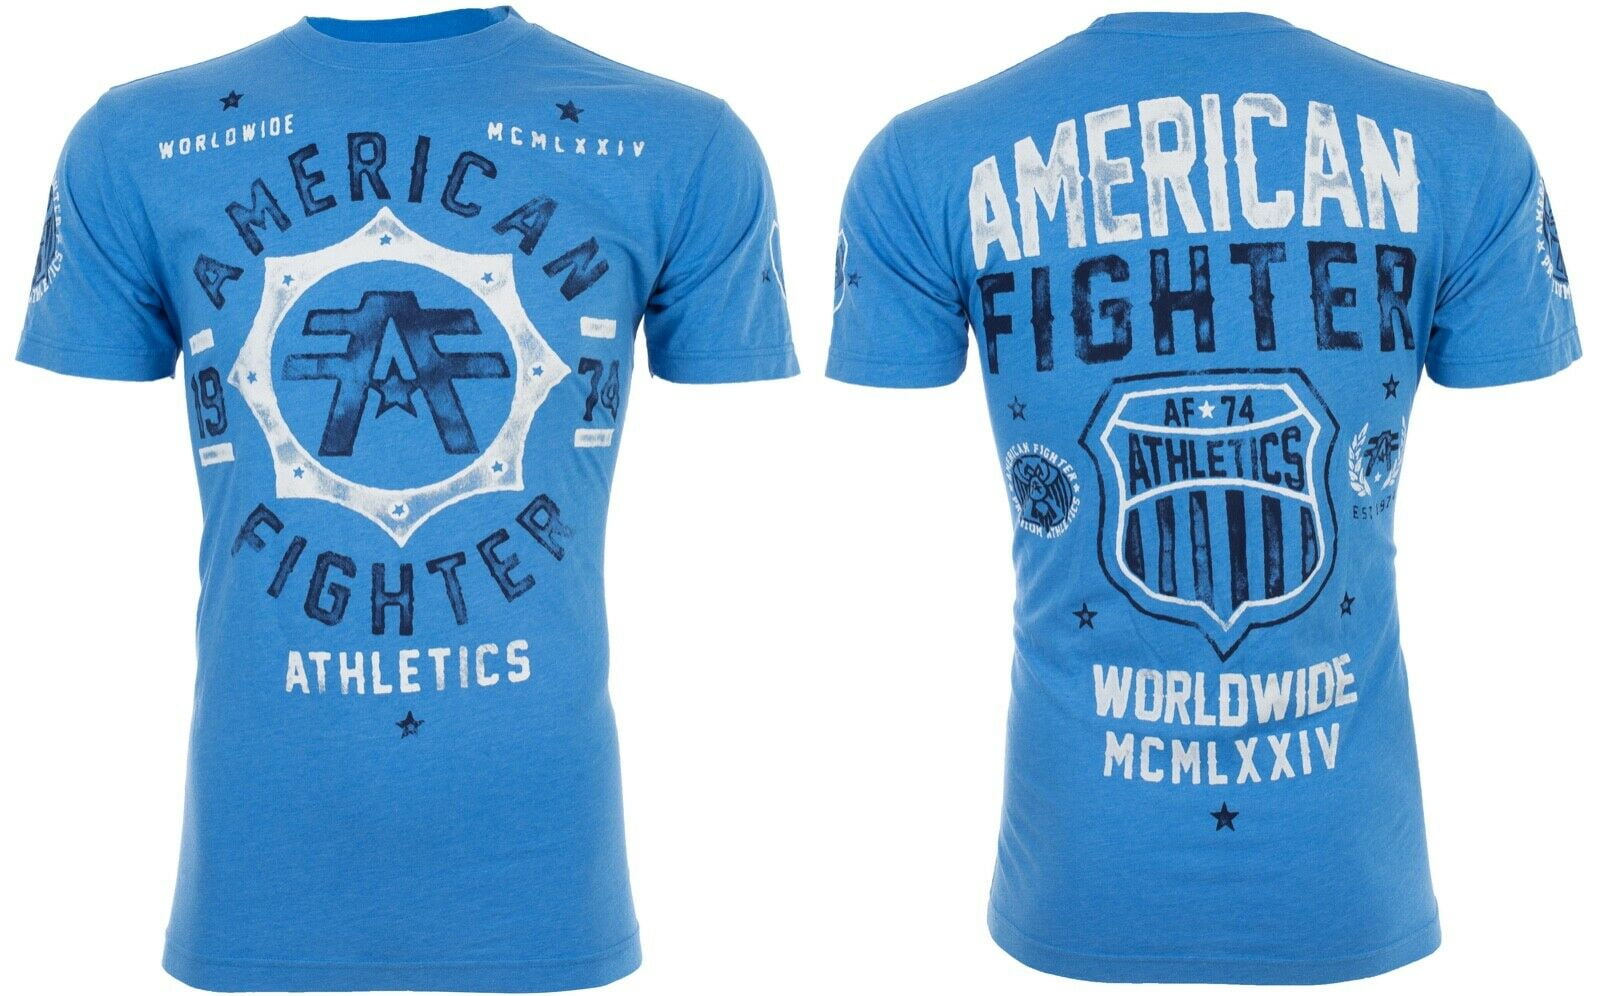 AMERICAN FIGHTER Mens T-Shirt GREEN MOUNTAIN  Athletic Biker MMA Gym UFC$40 